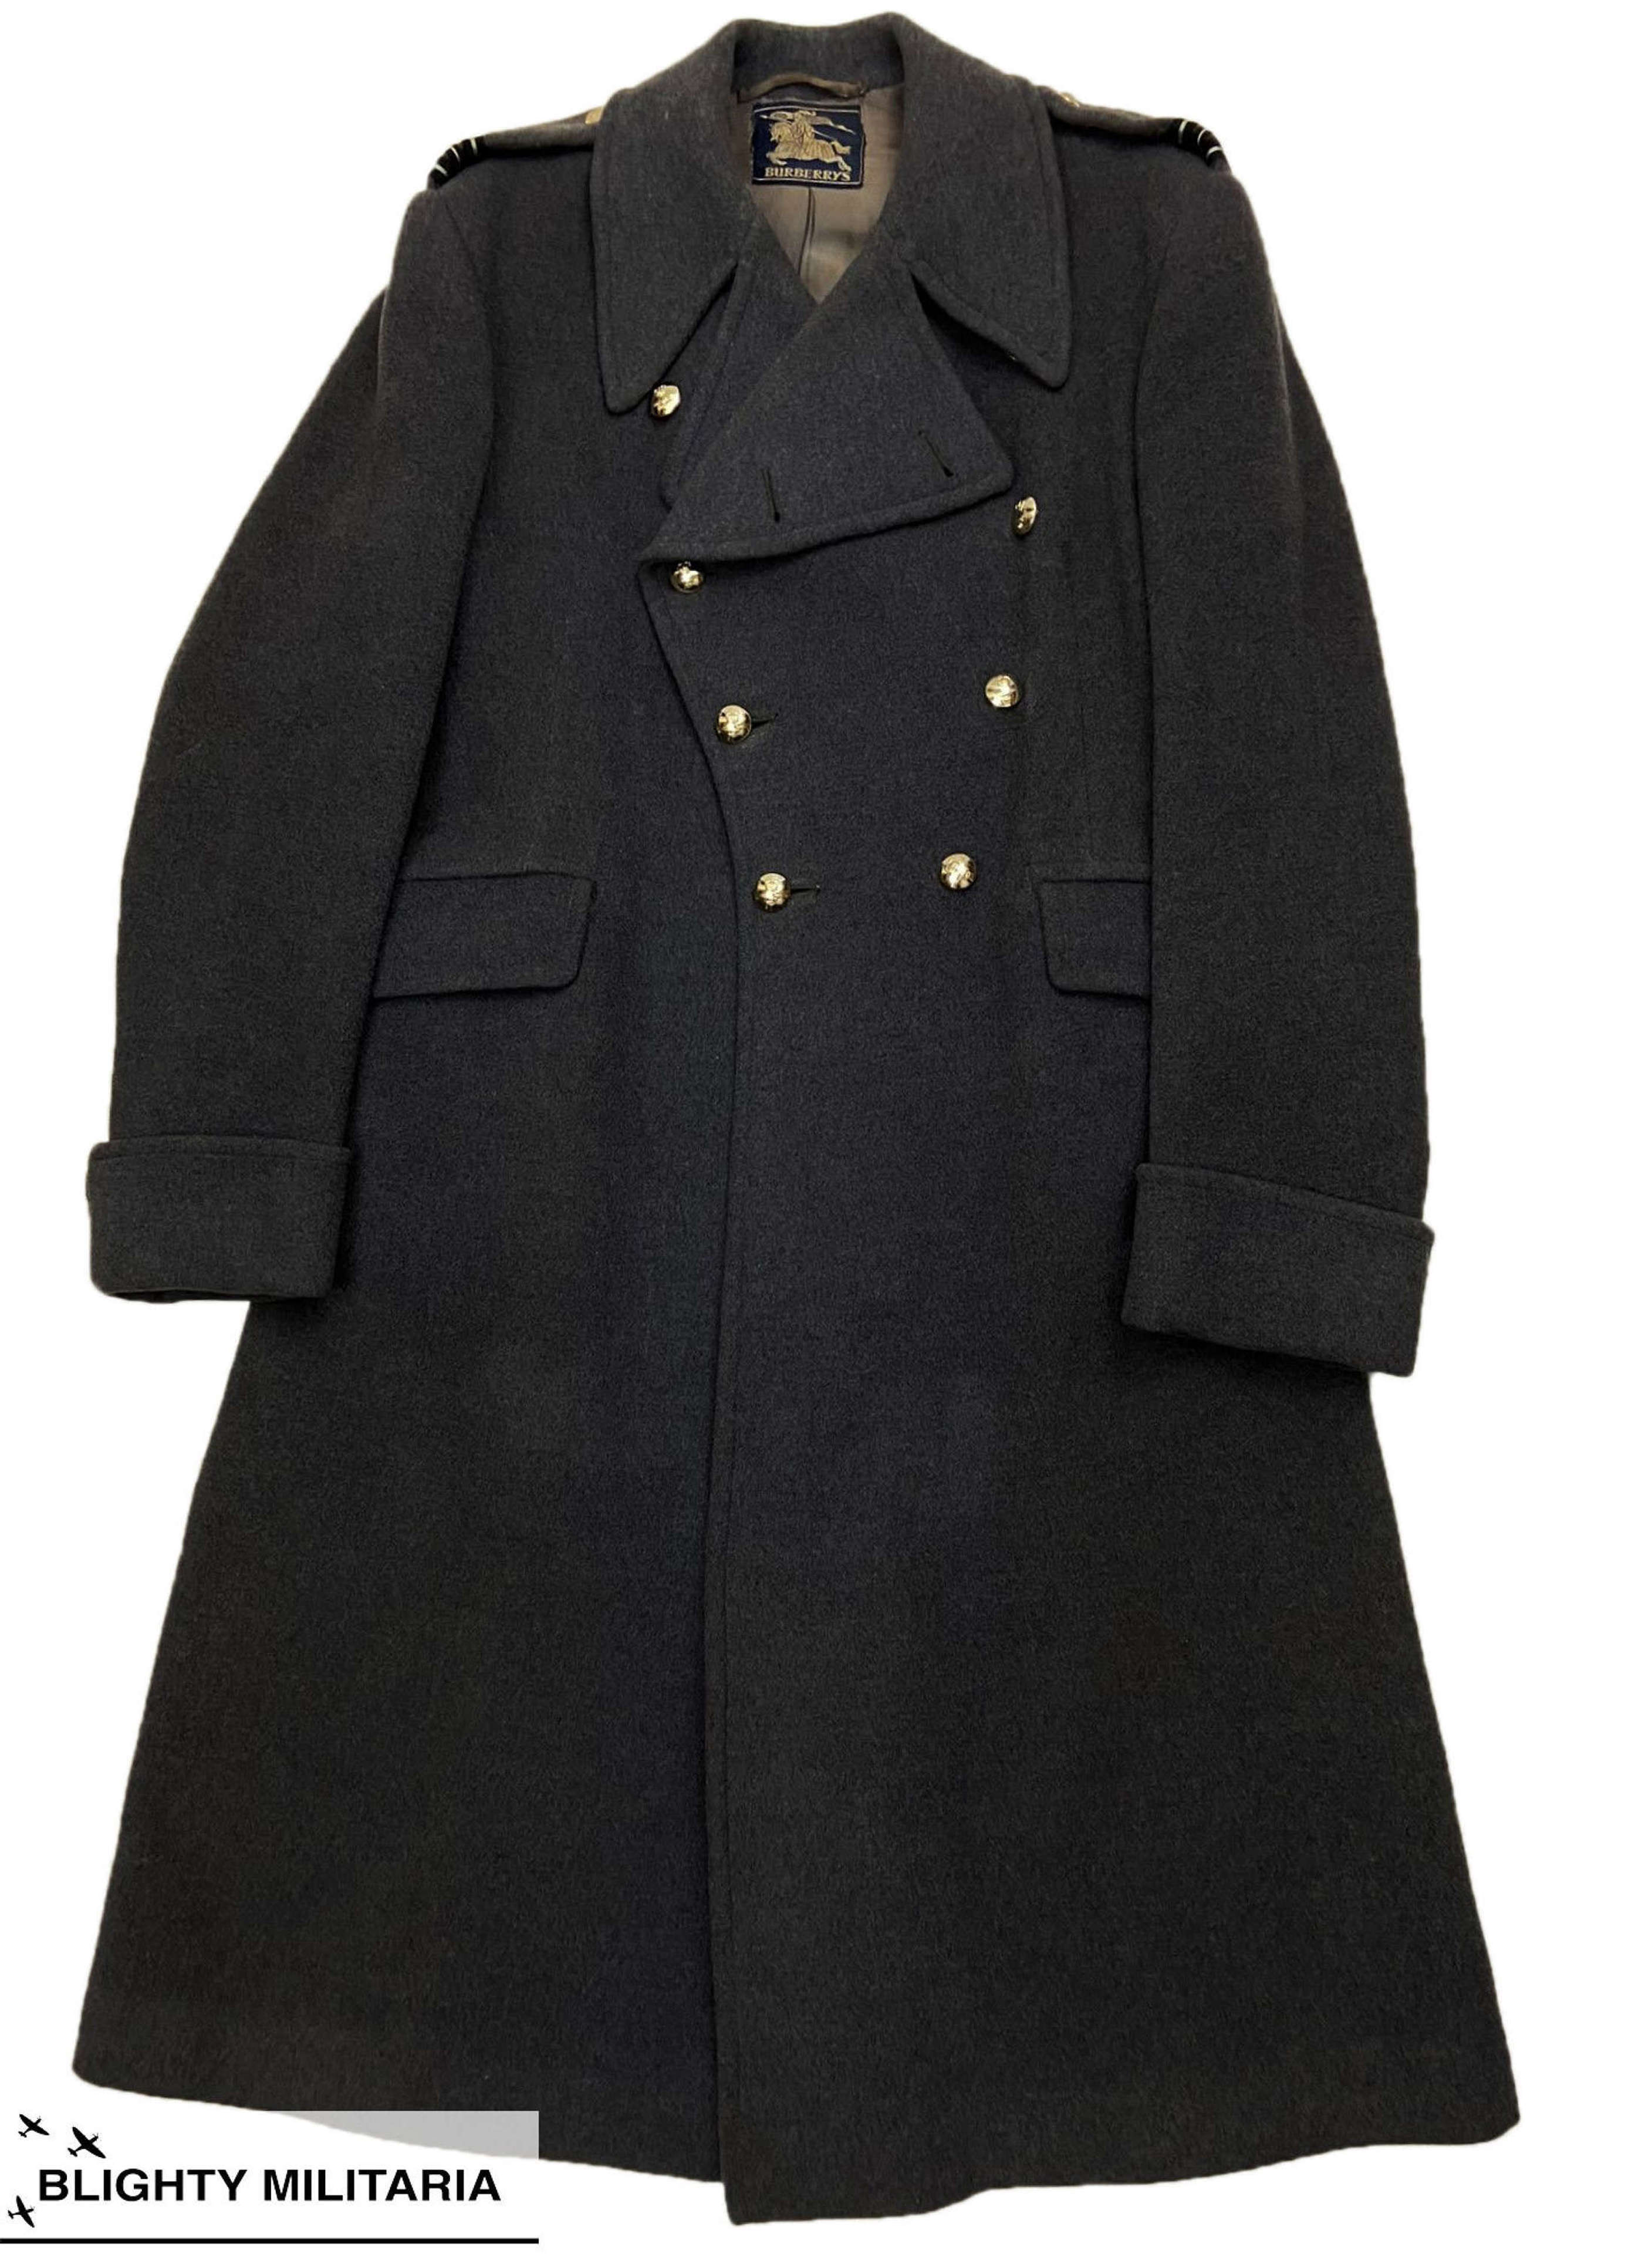 Original 1954 Dated RAF Officers Greatcoat by 'Burberrys' - Tuckey